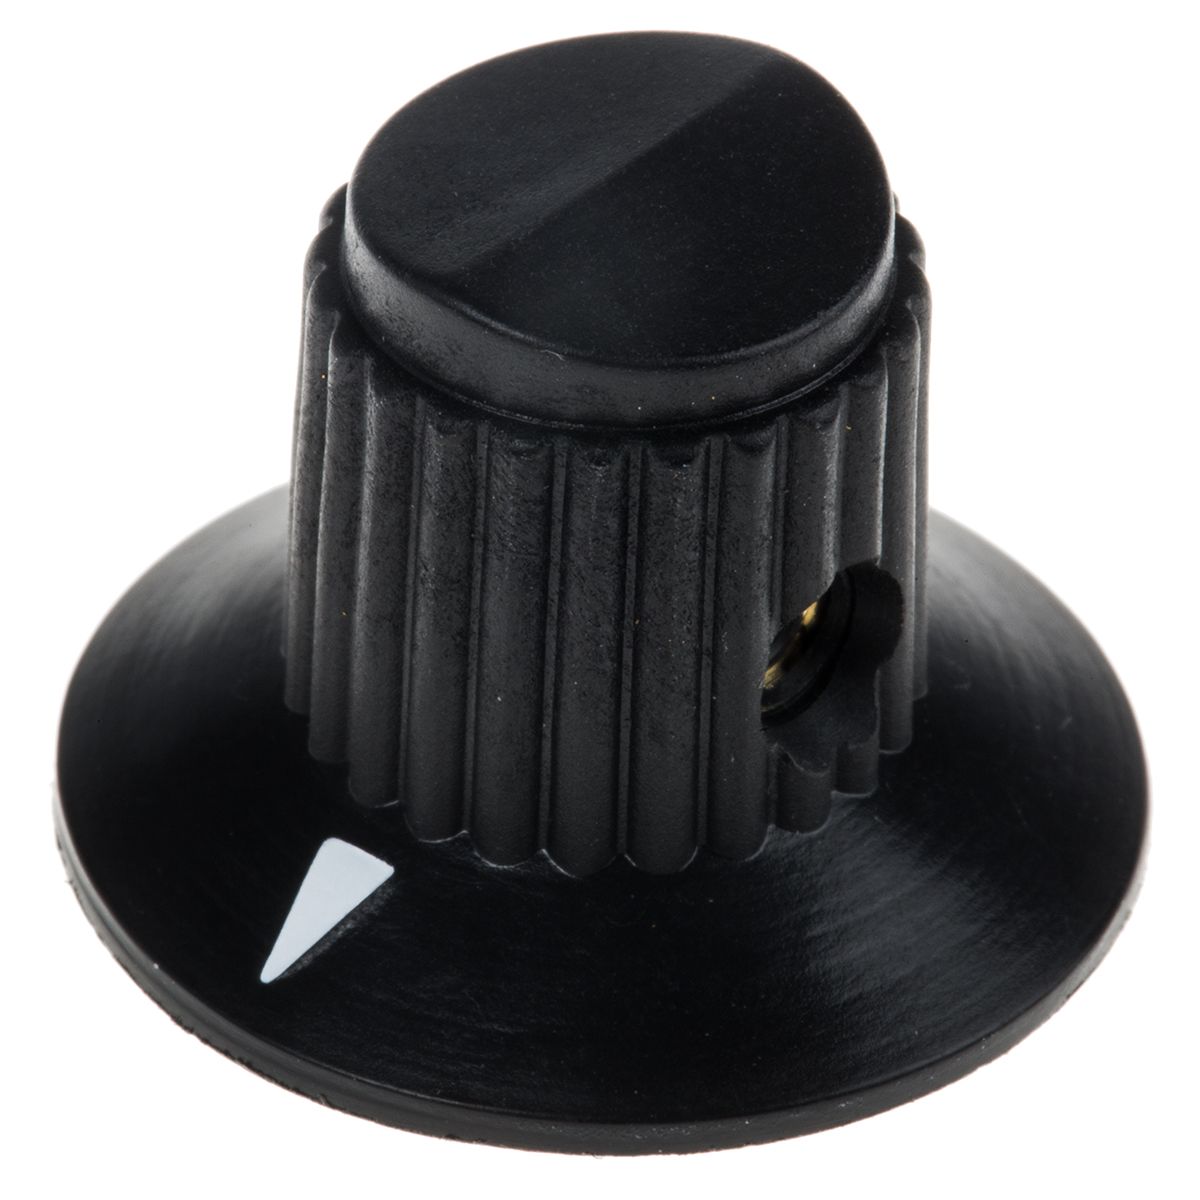 Grayhill Rotary Switch Knob for use with Encoders, Rotary Switch